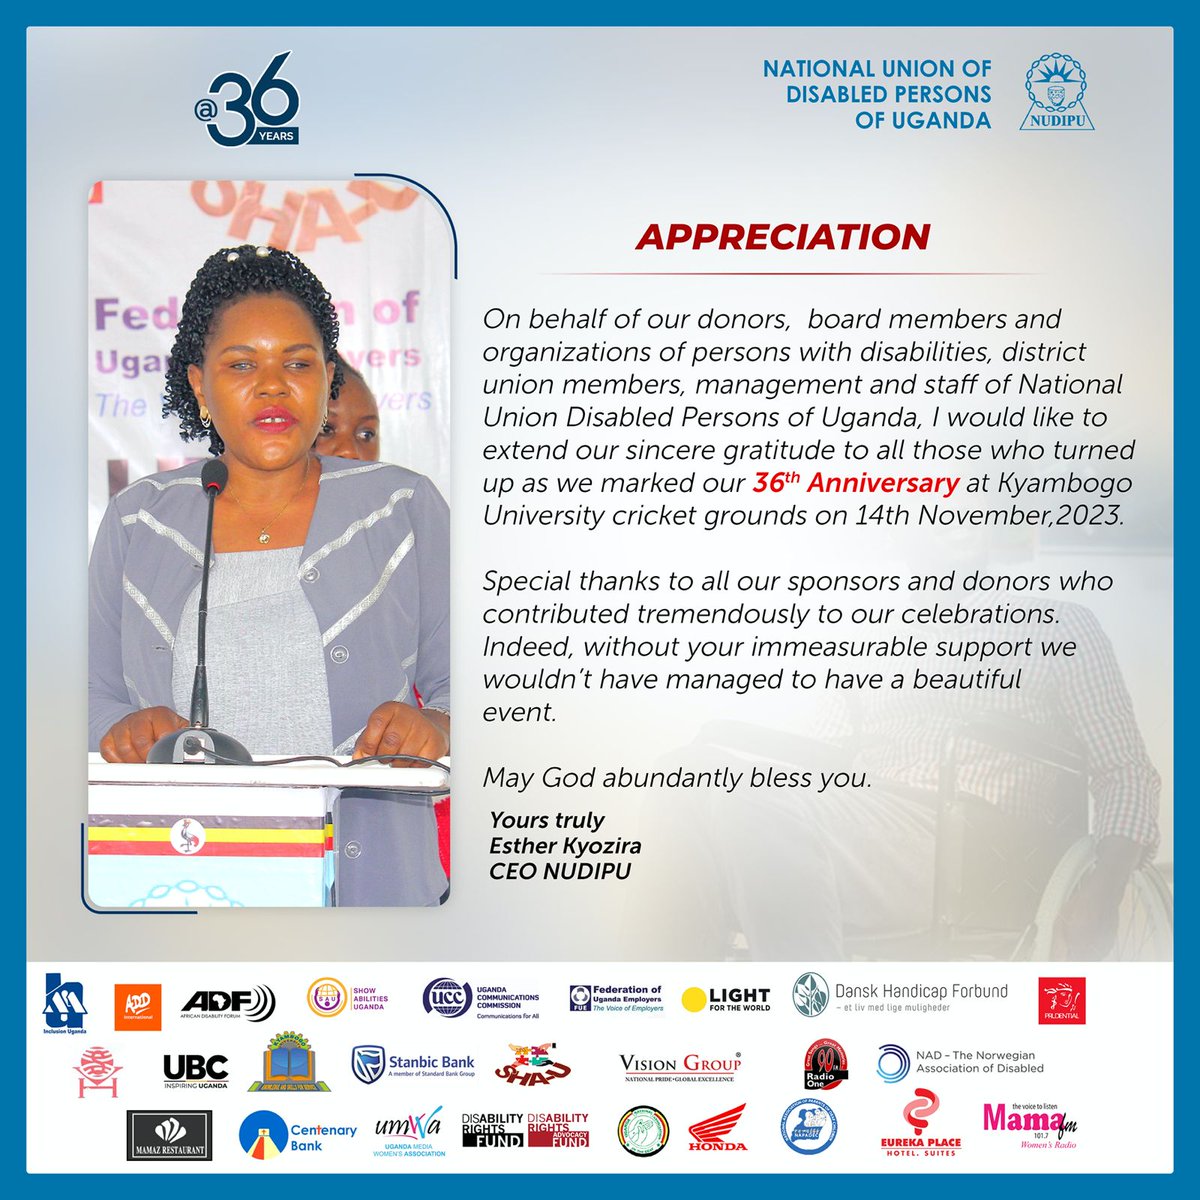 We extend our gratitude to all those who turned up to mark our notable event as we celebrated our 36th anniversary. To those who contributed both financially & materially we value your contributions. Not forgetting the exhibitors, you added meaning to the event. @Mglsd_UG